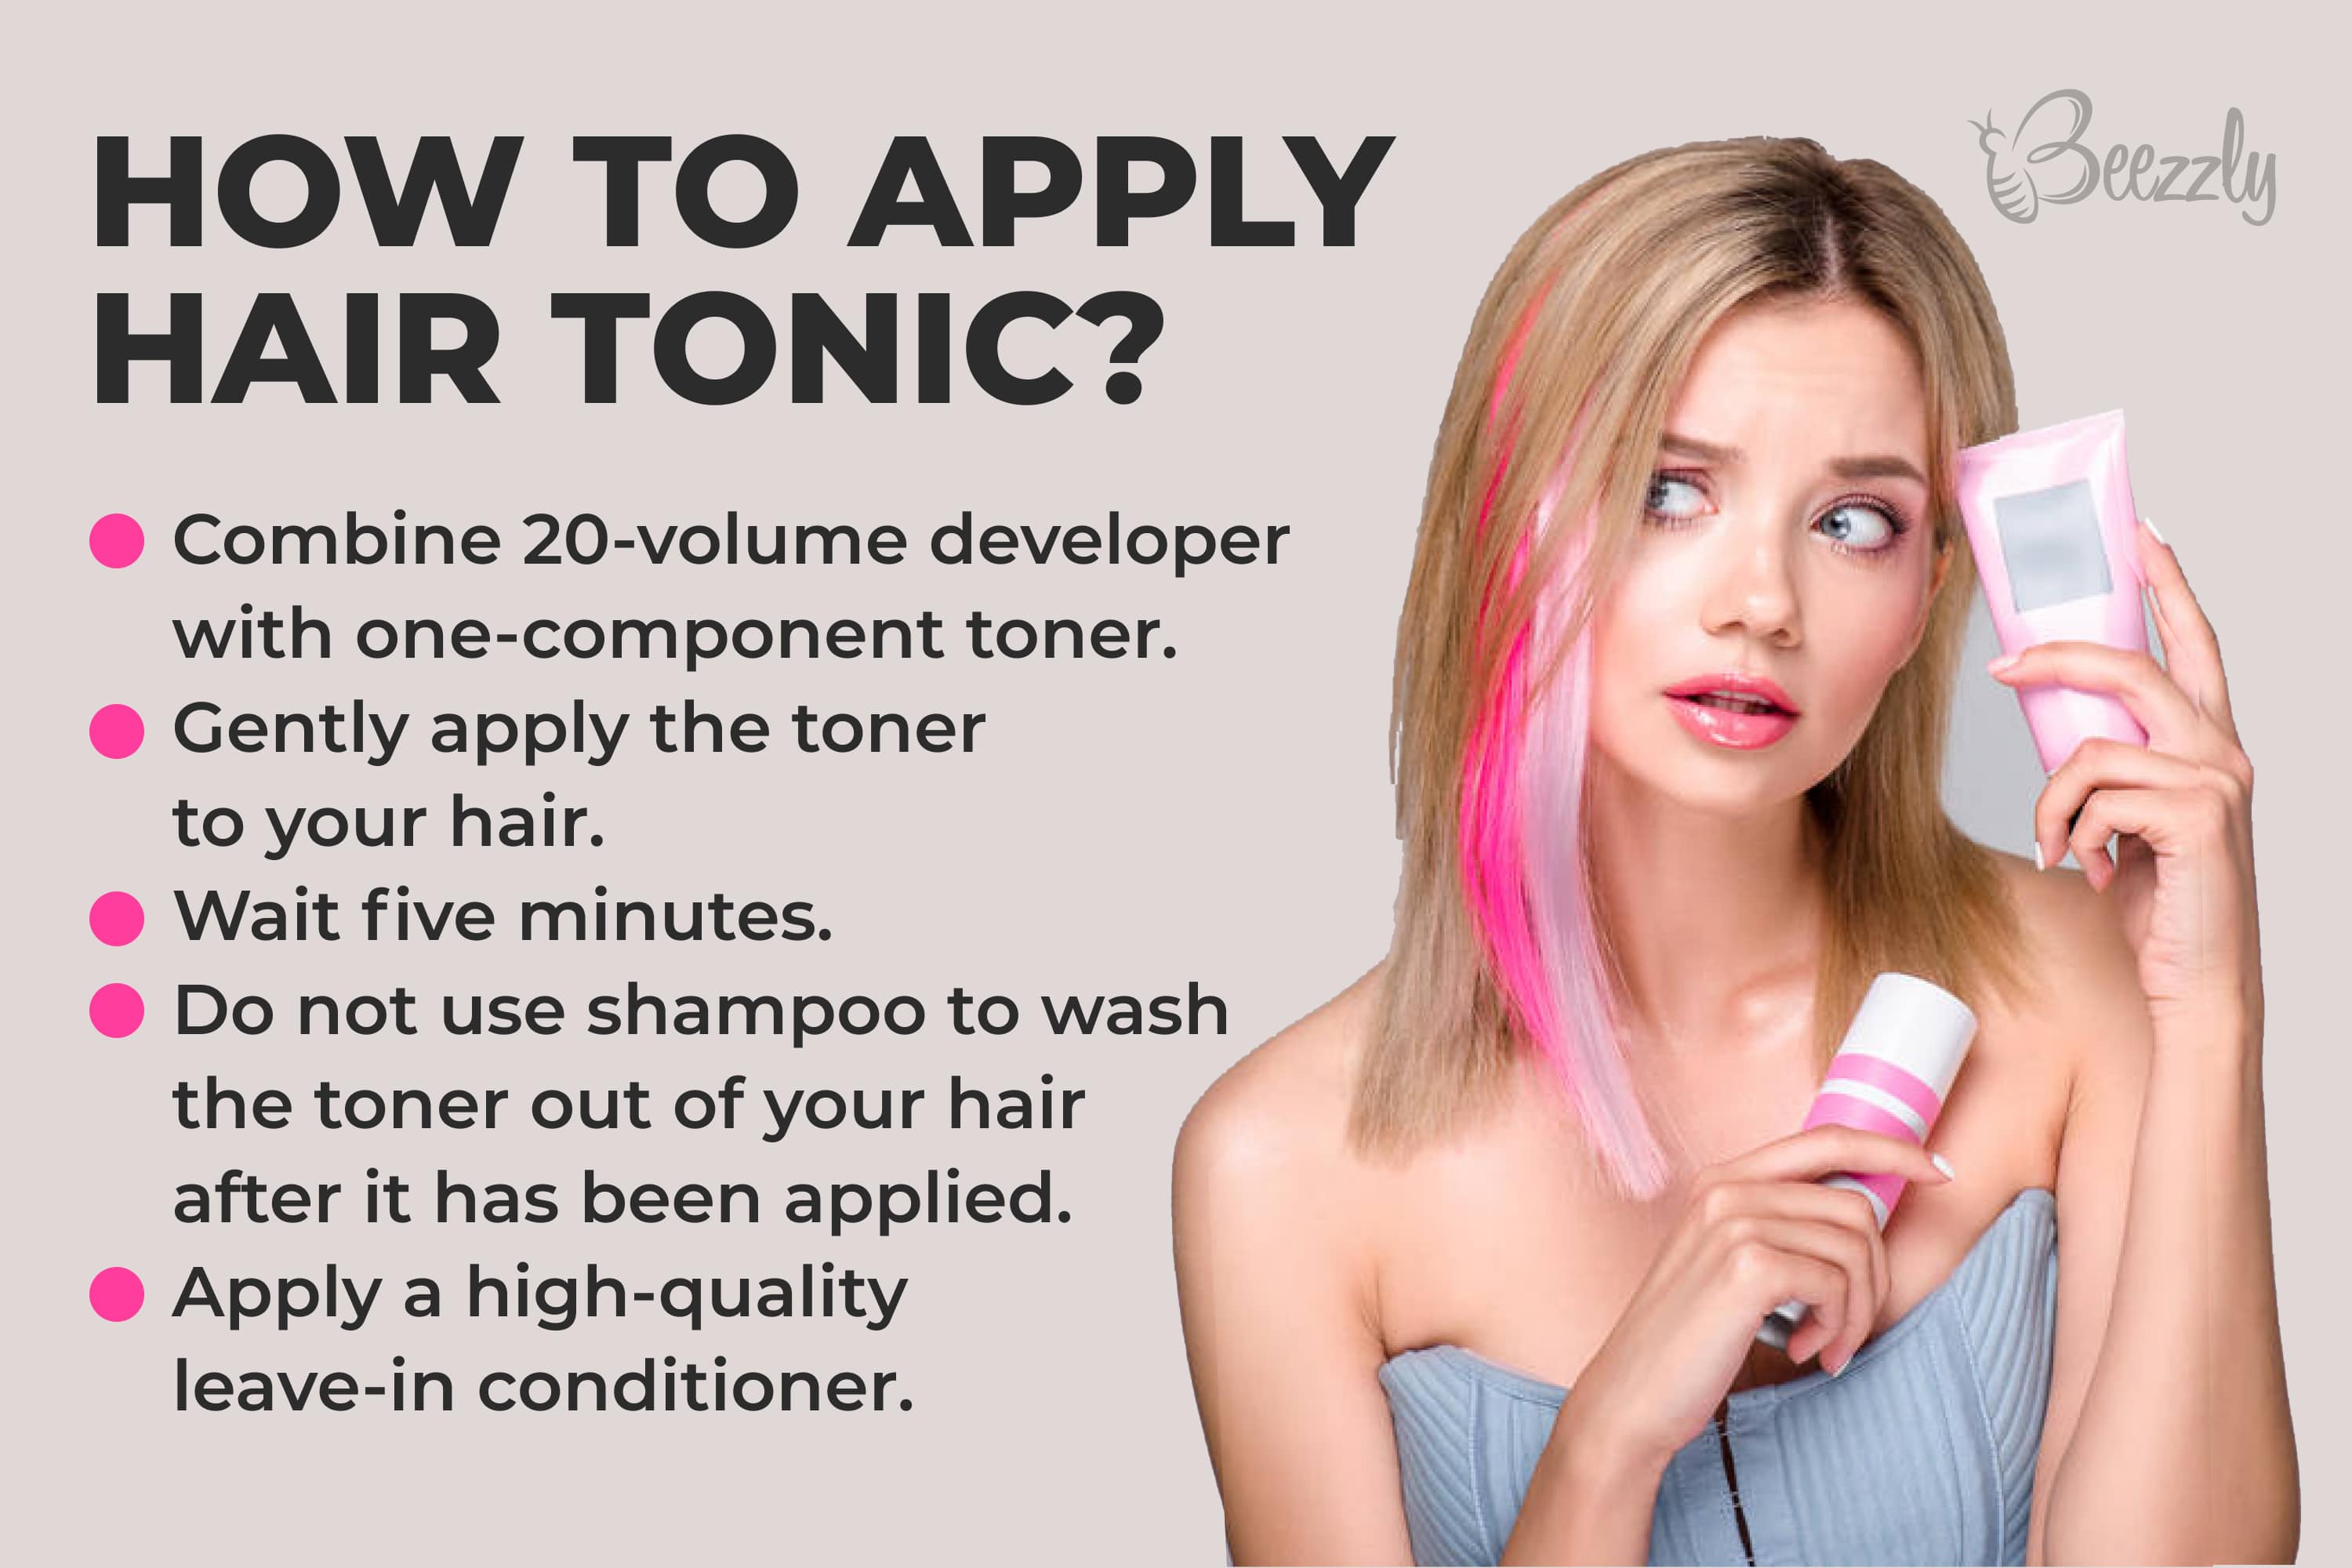 How to apply hair tonic